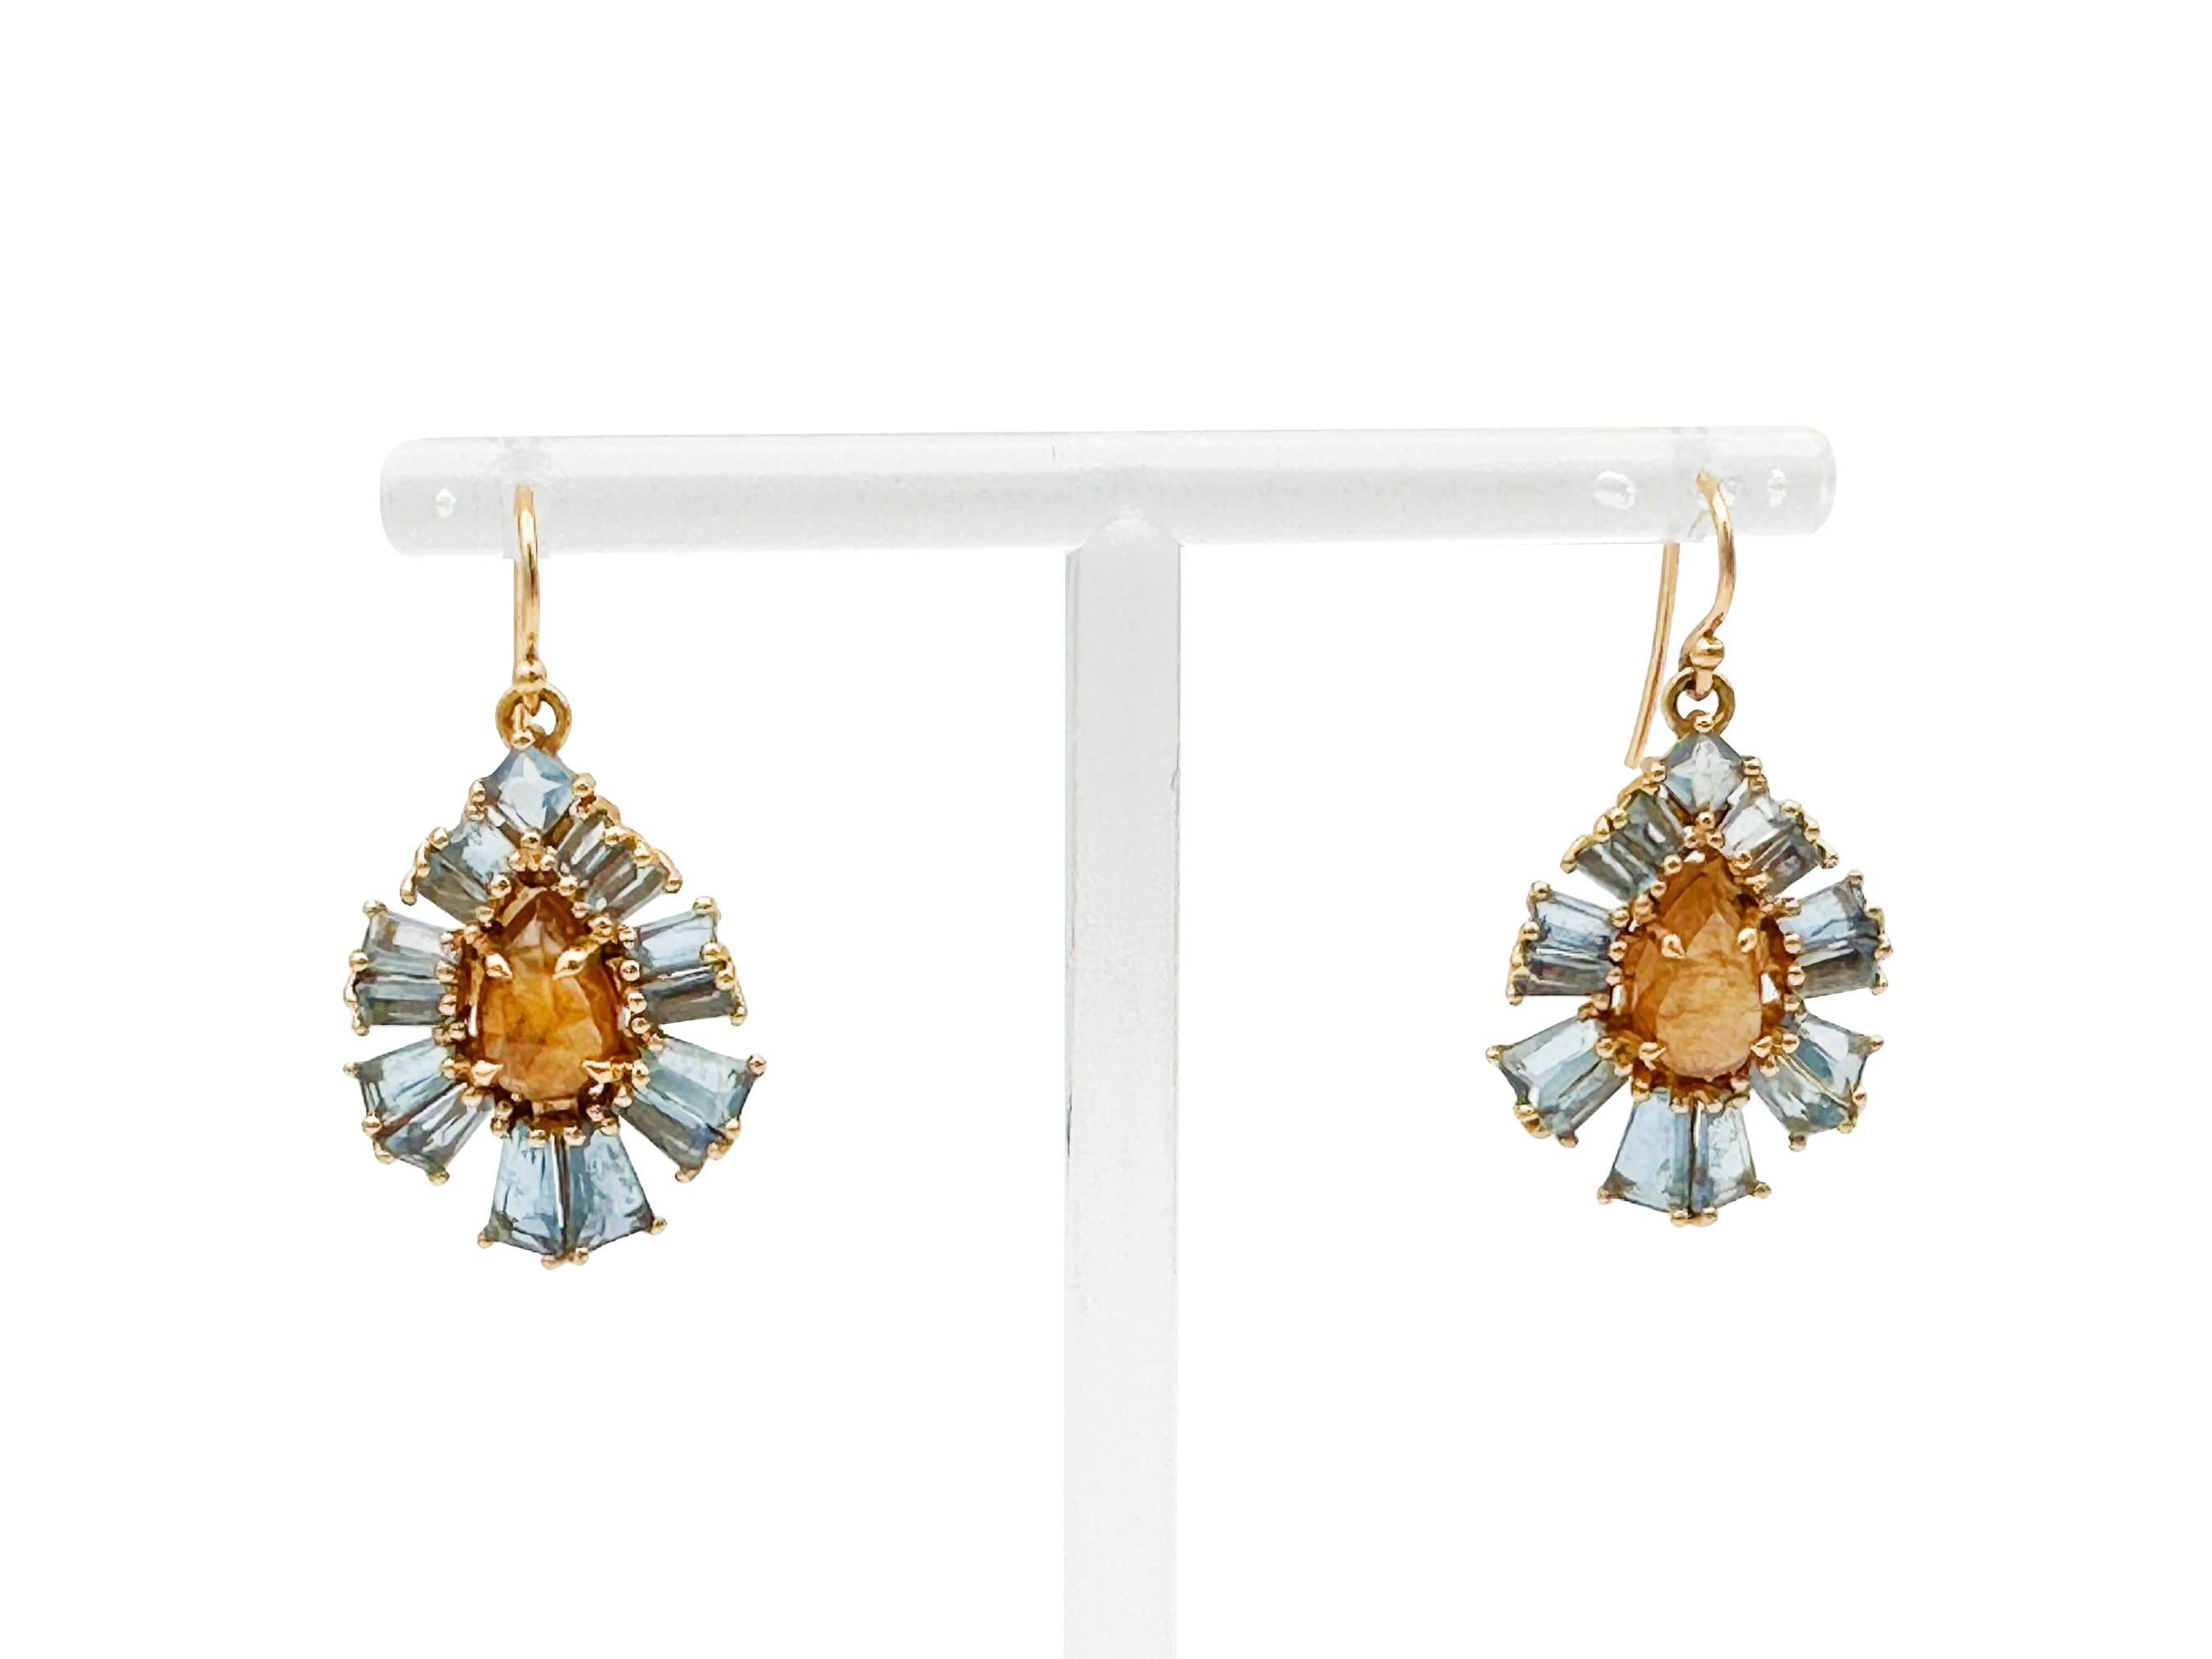 Stunning Nak Armstrong designer drop earrings in a fluttery, elegant design. The earrings featuring 5.6 carats of tapered baguette-cut aquamarine and 4.26 carats of pear-shaped brown zircon; a total of 34 stones in proprietary cuts, individually set